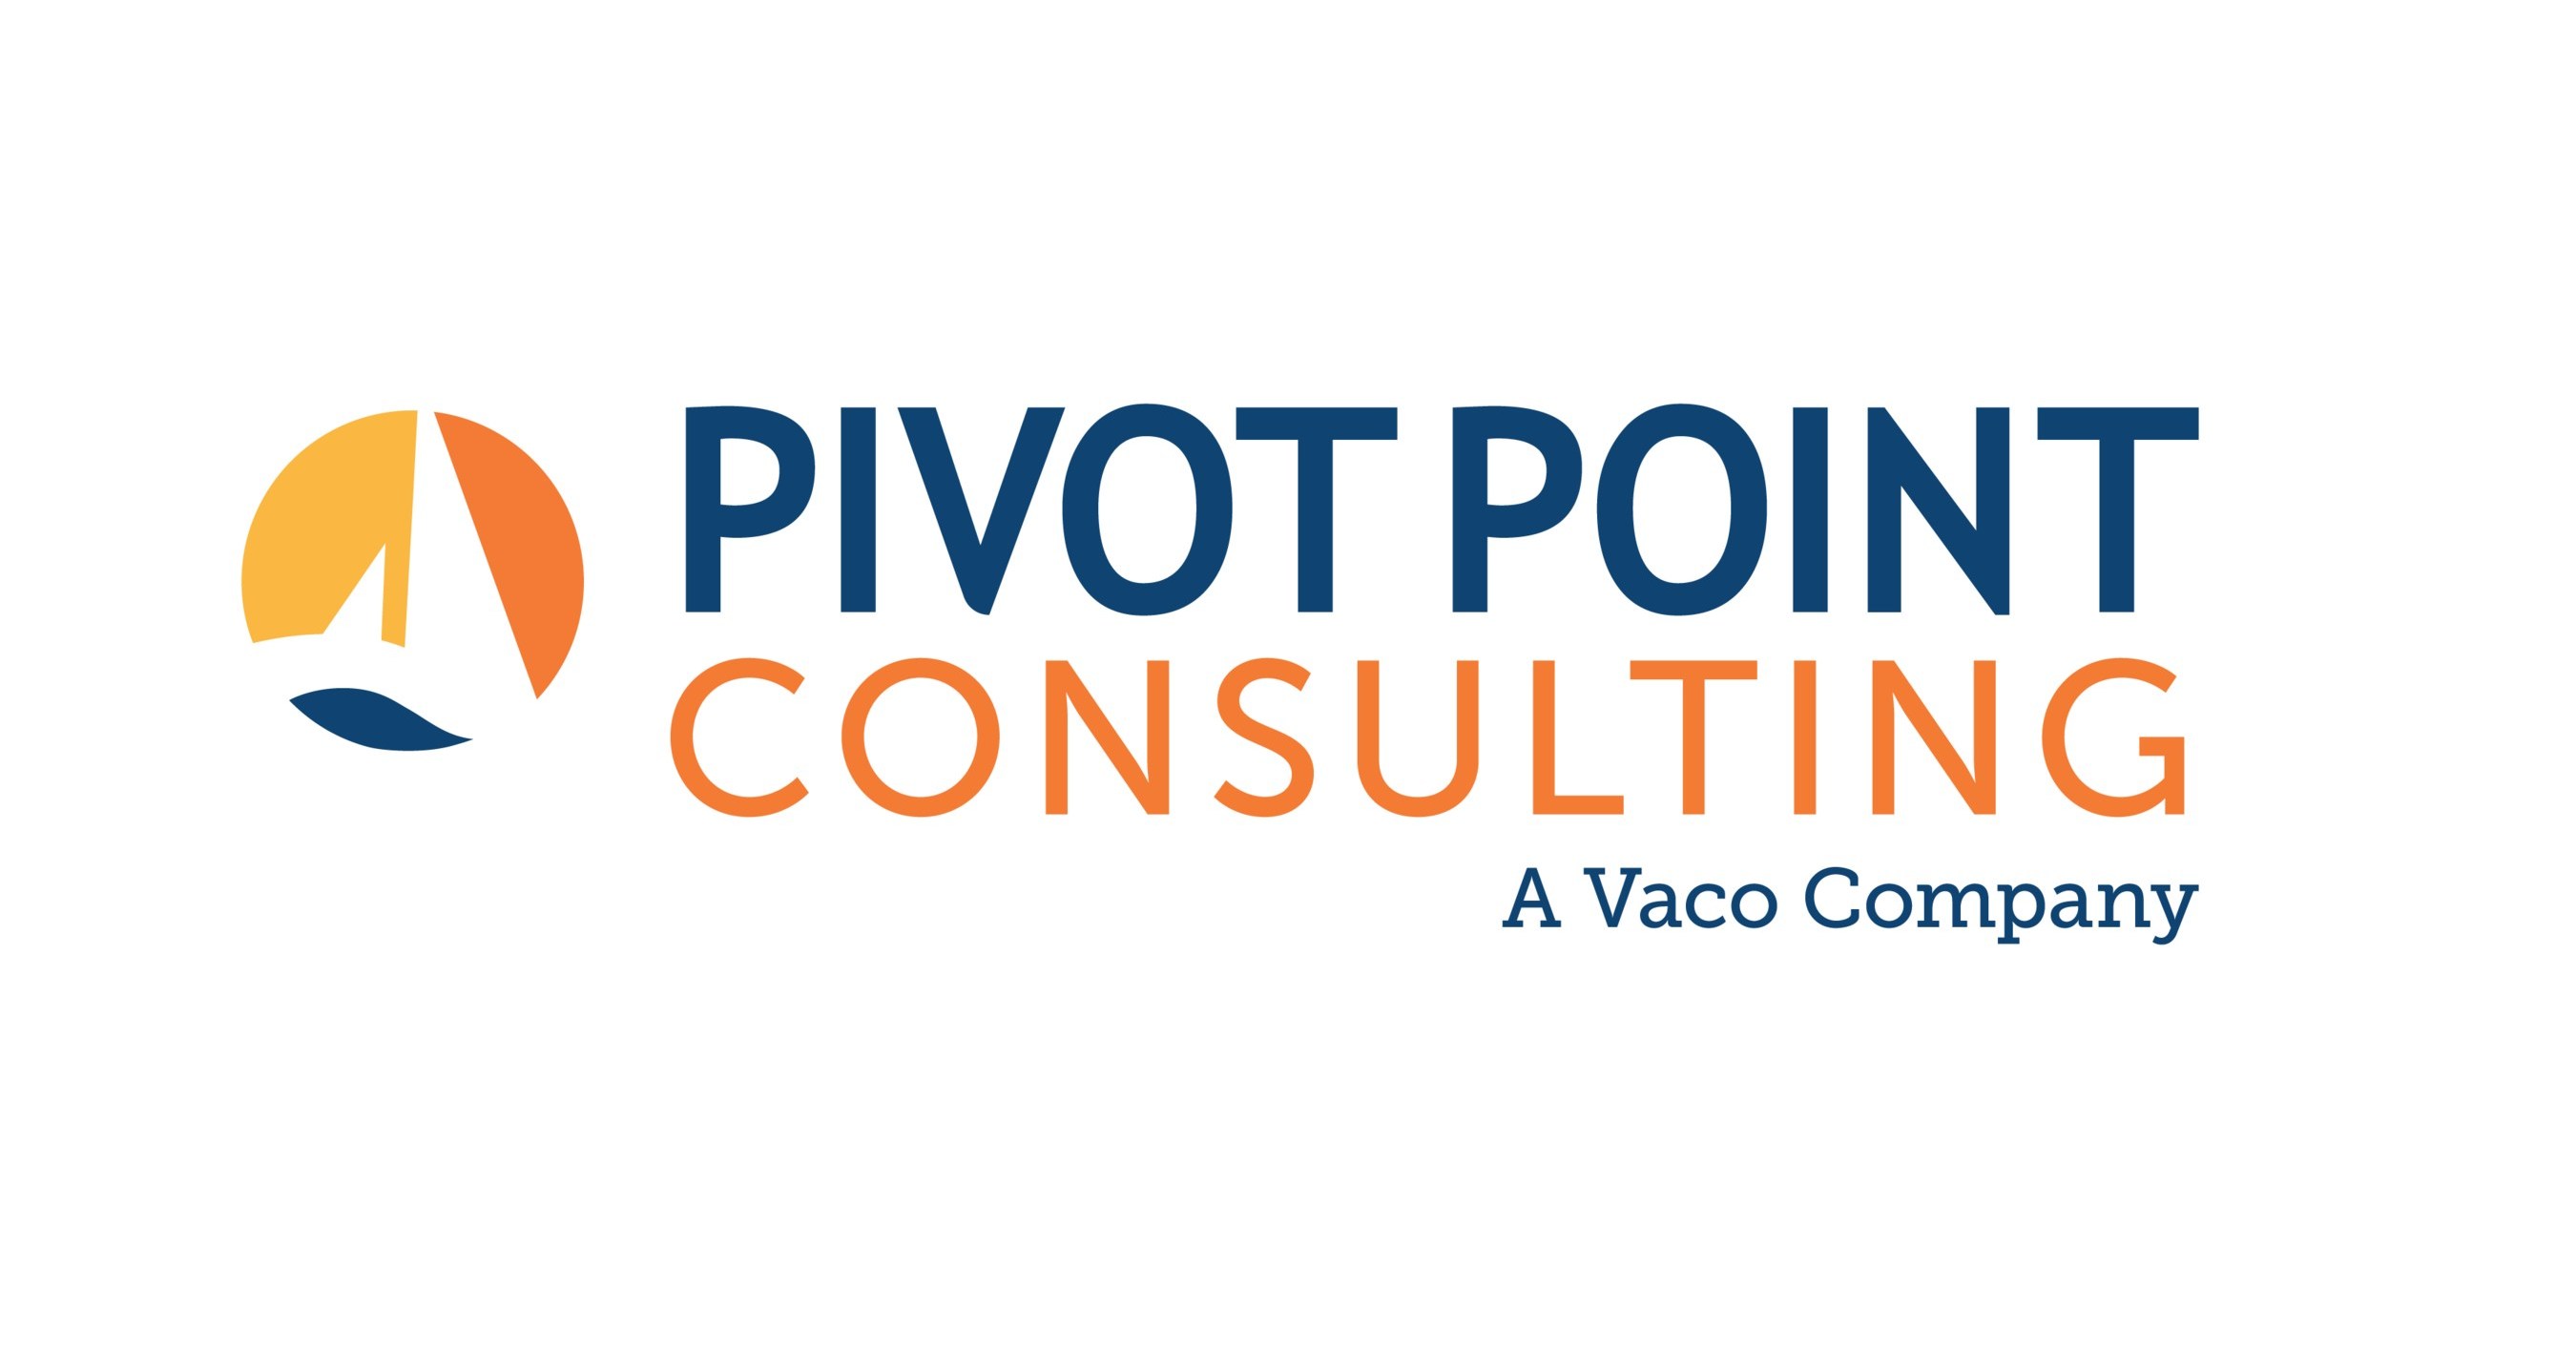 Pivot Point Consulting Supports Live Deployment of OCHIN Epic Electronic Health Record System at Chicago's Erie Family Health